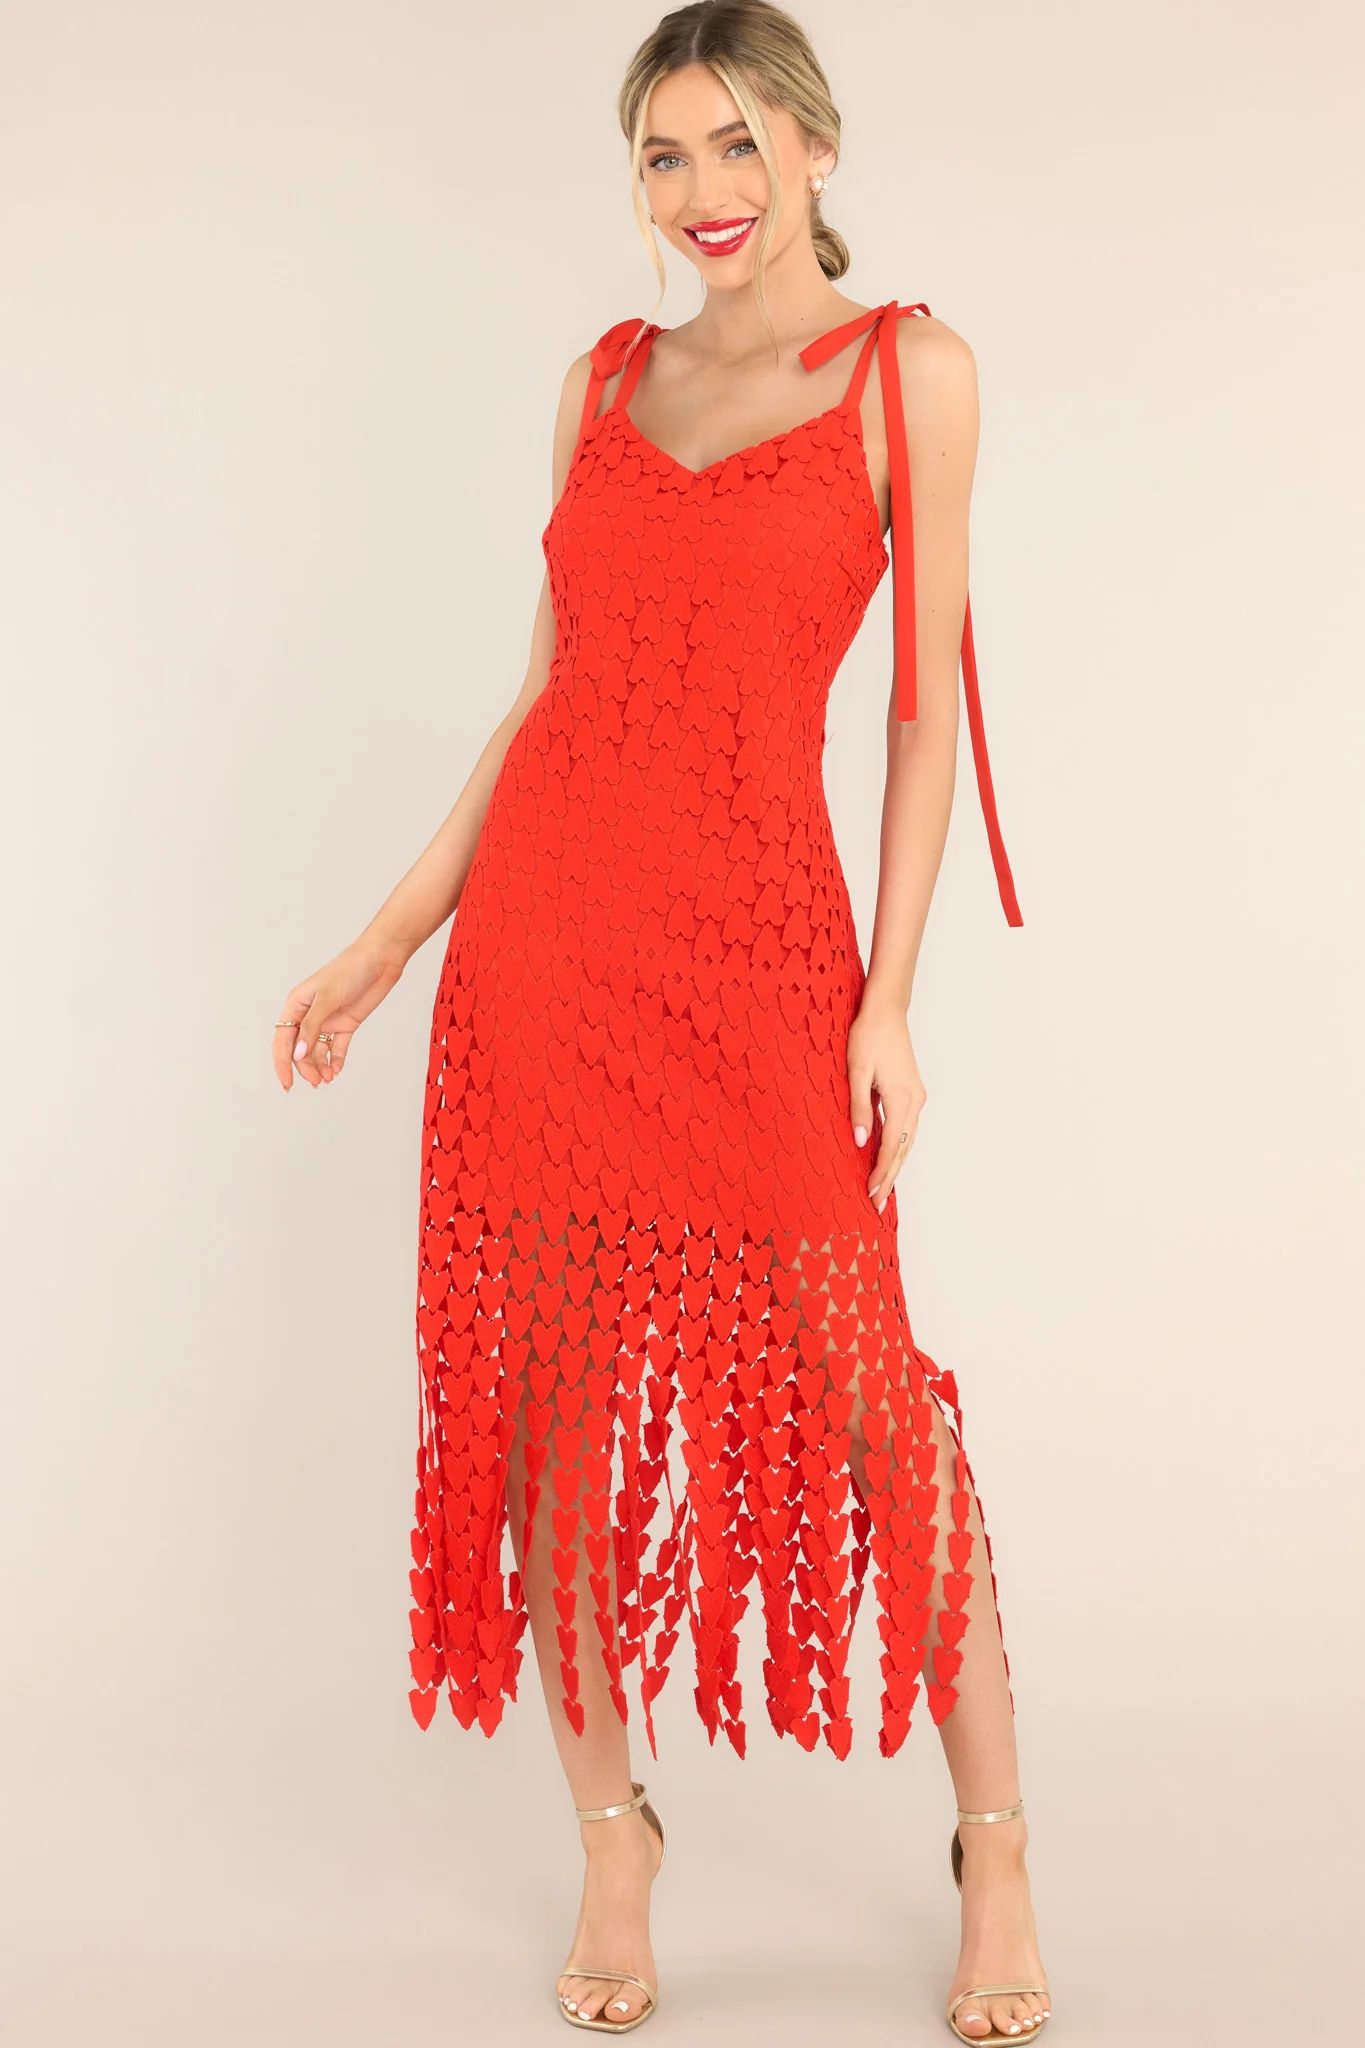 Heart On Display Red Heart Lace Midi Dress | Red Dress 